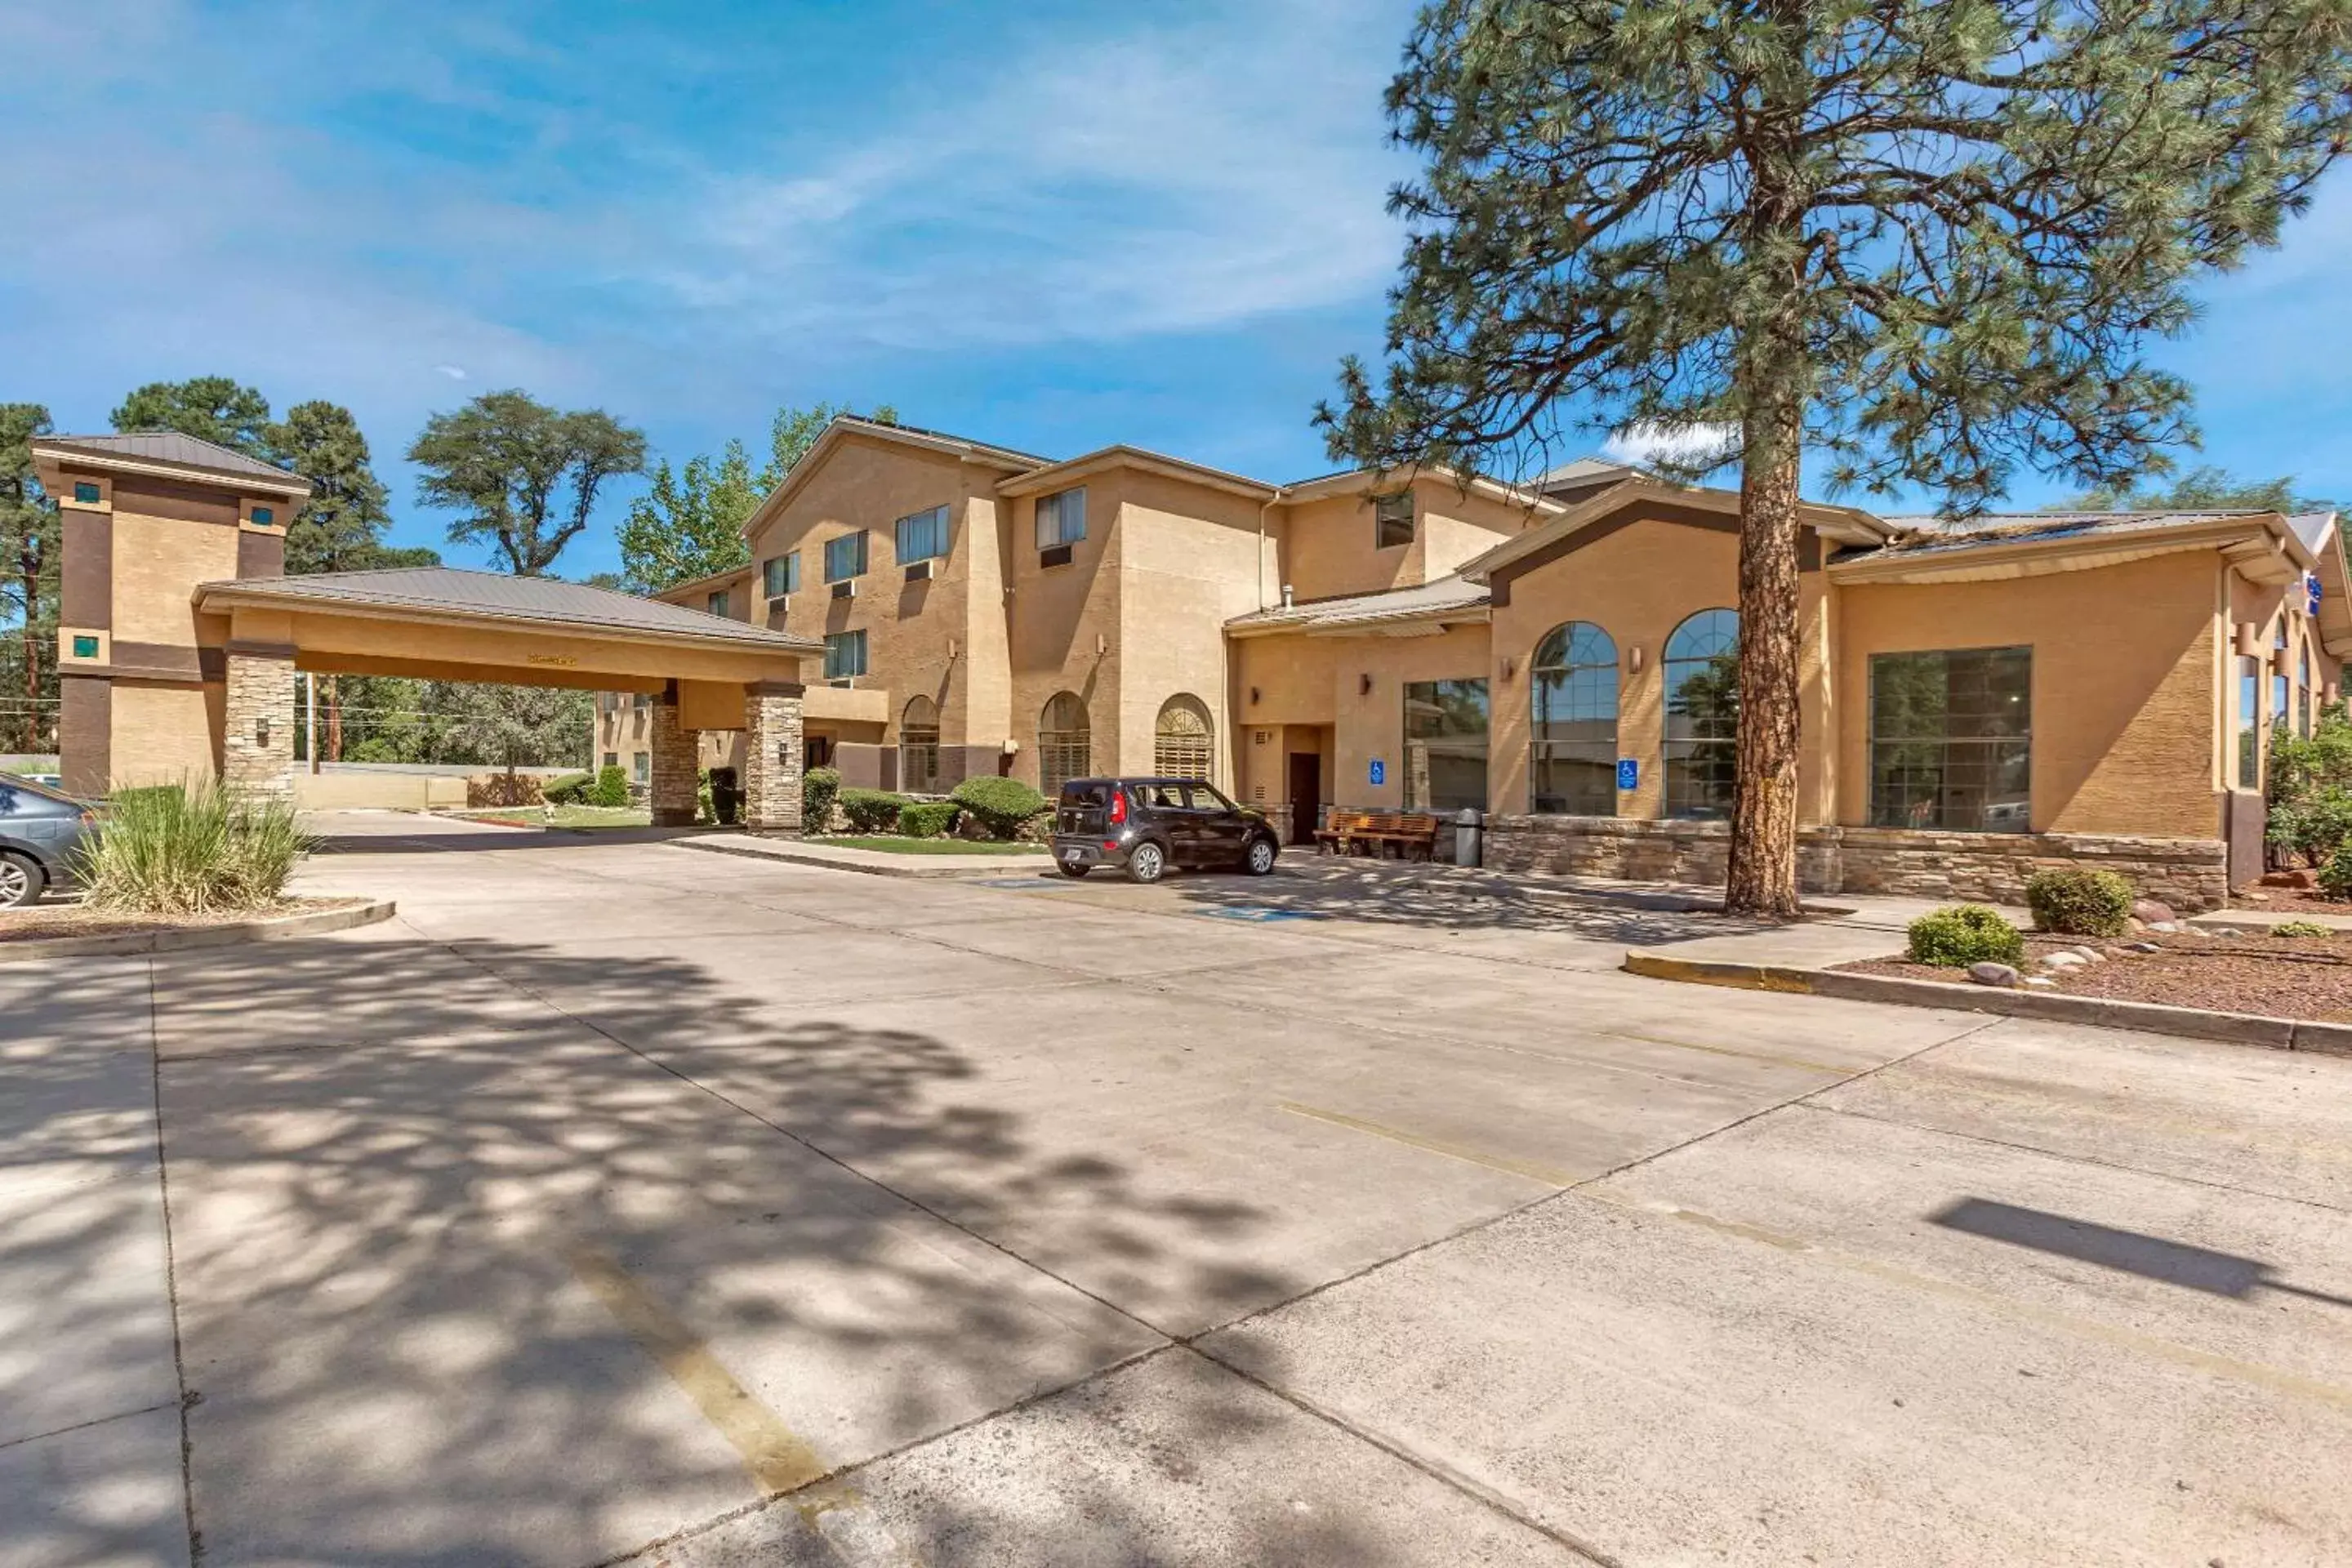 Property Building in Comfort Inn Payson